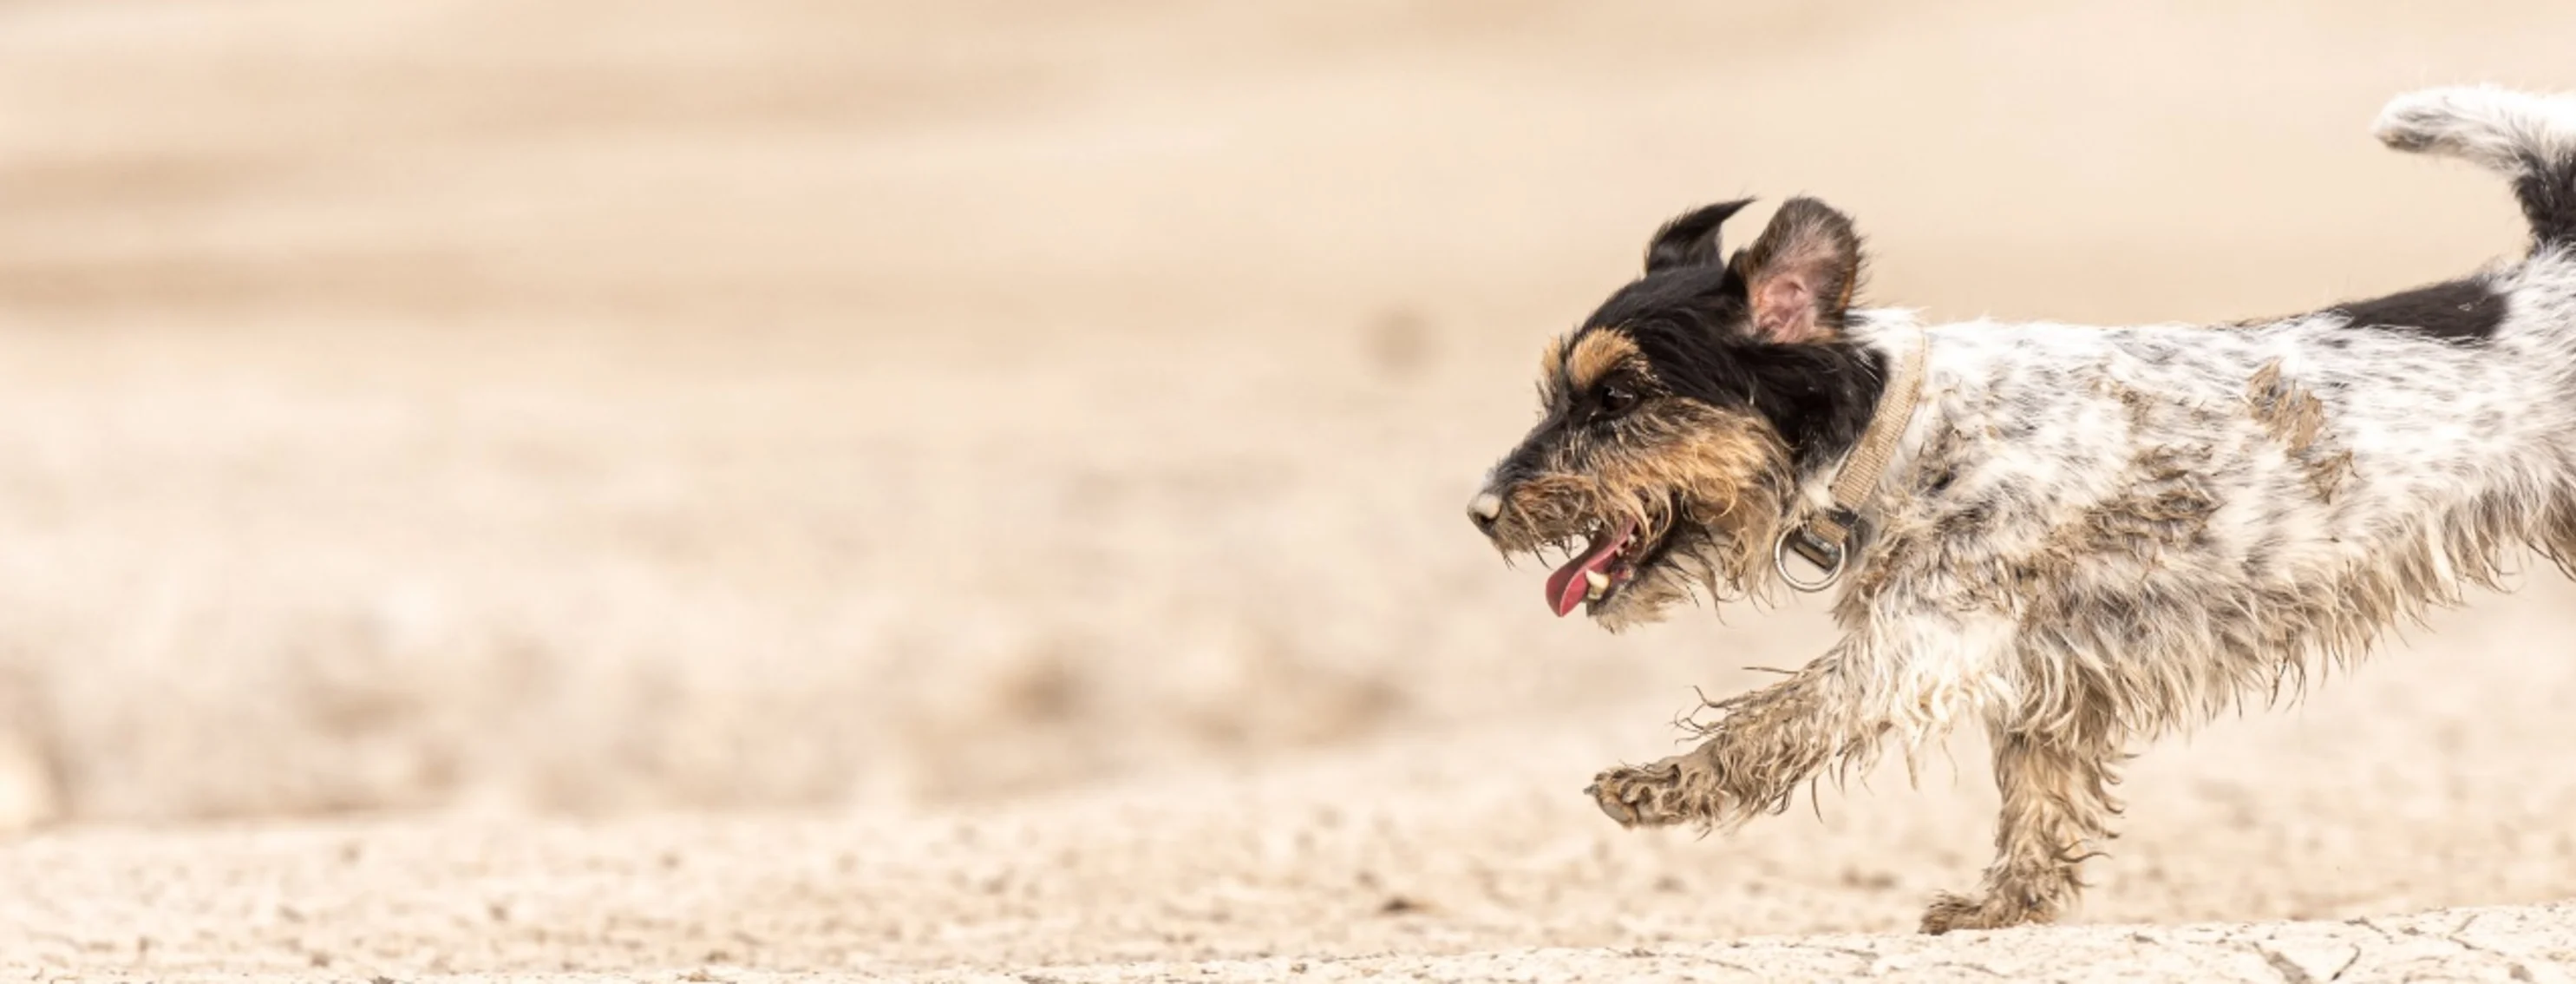 Small dog running through the desert sand on the right